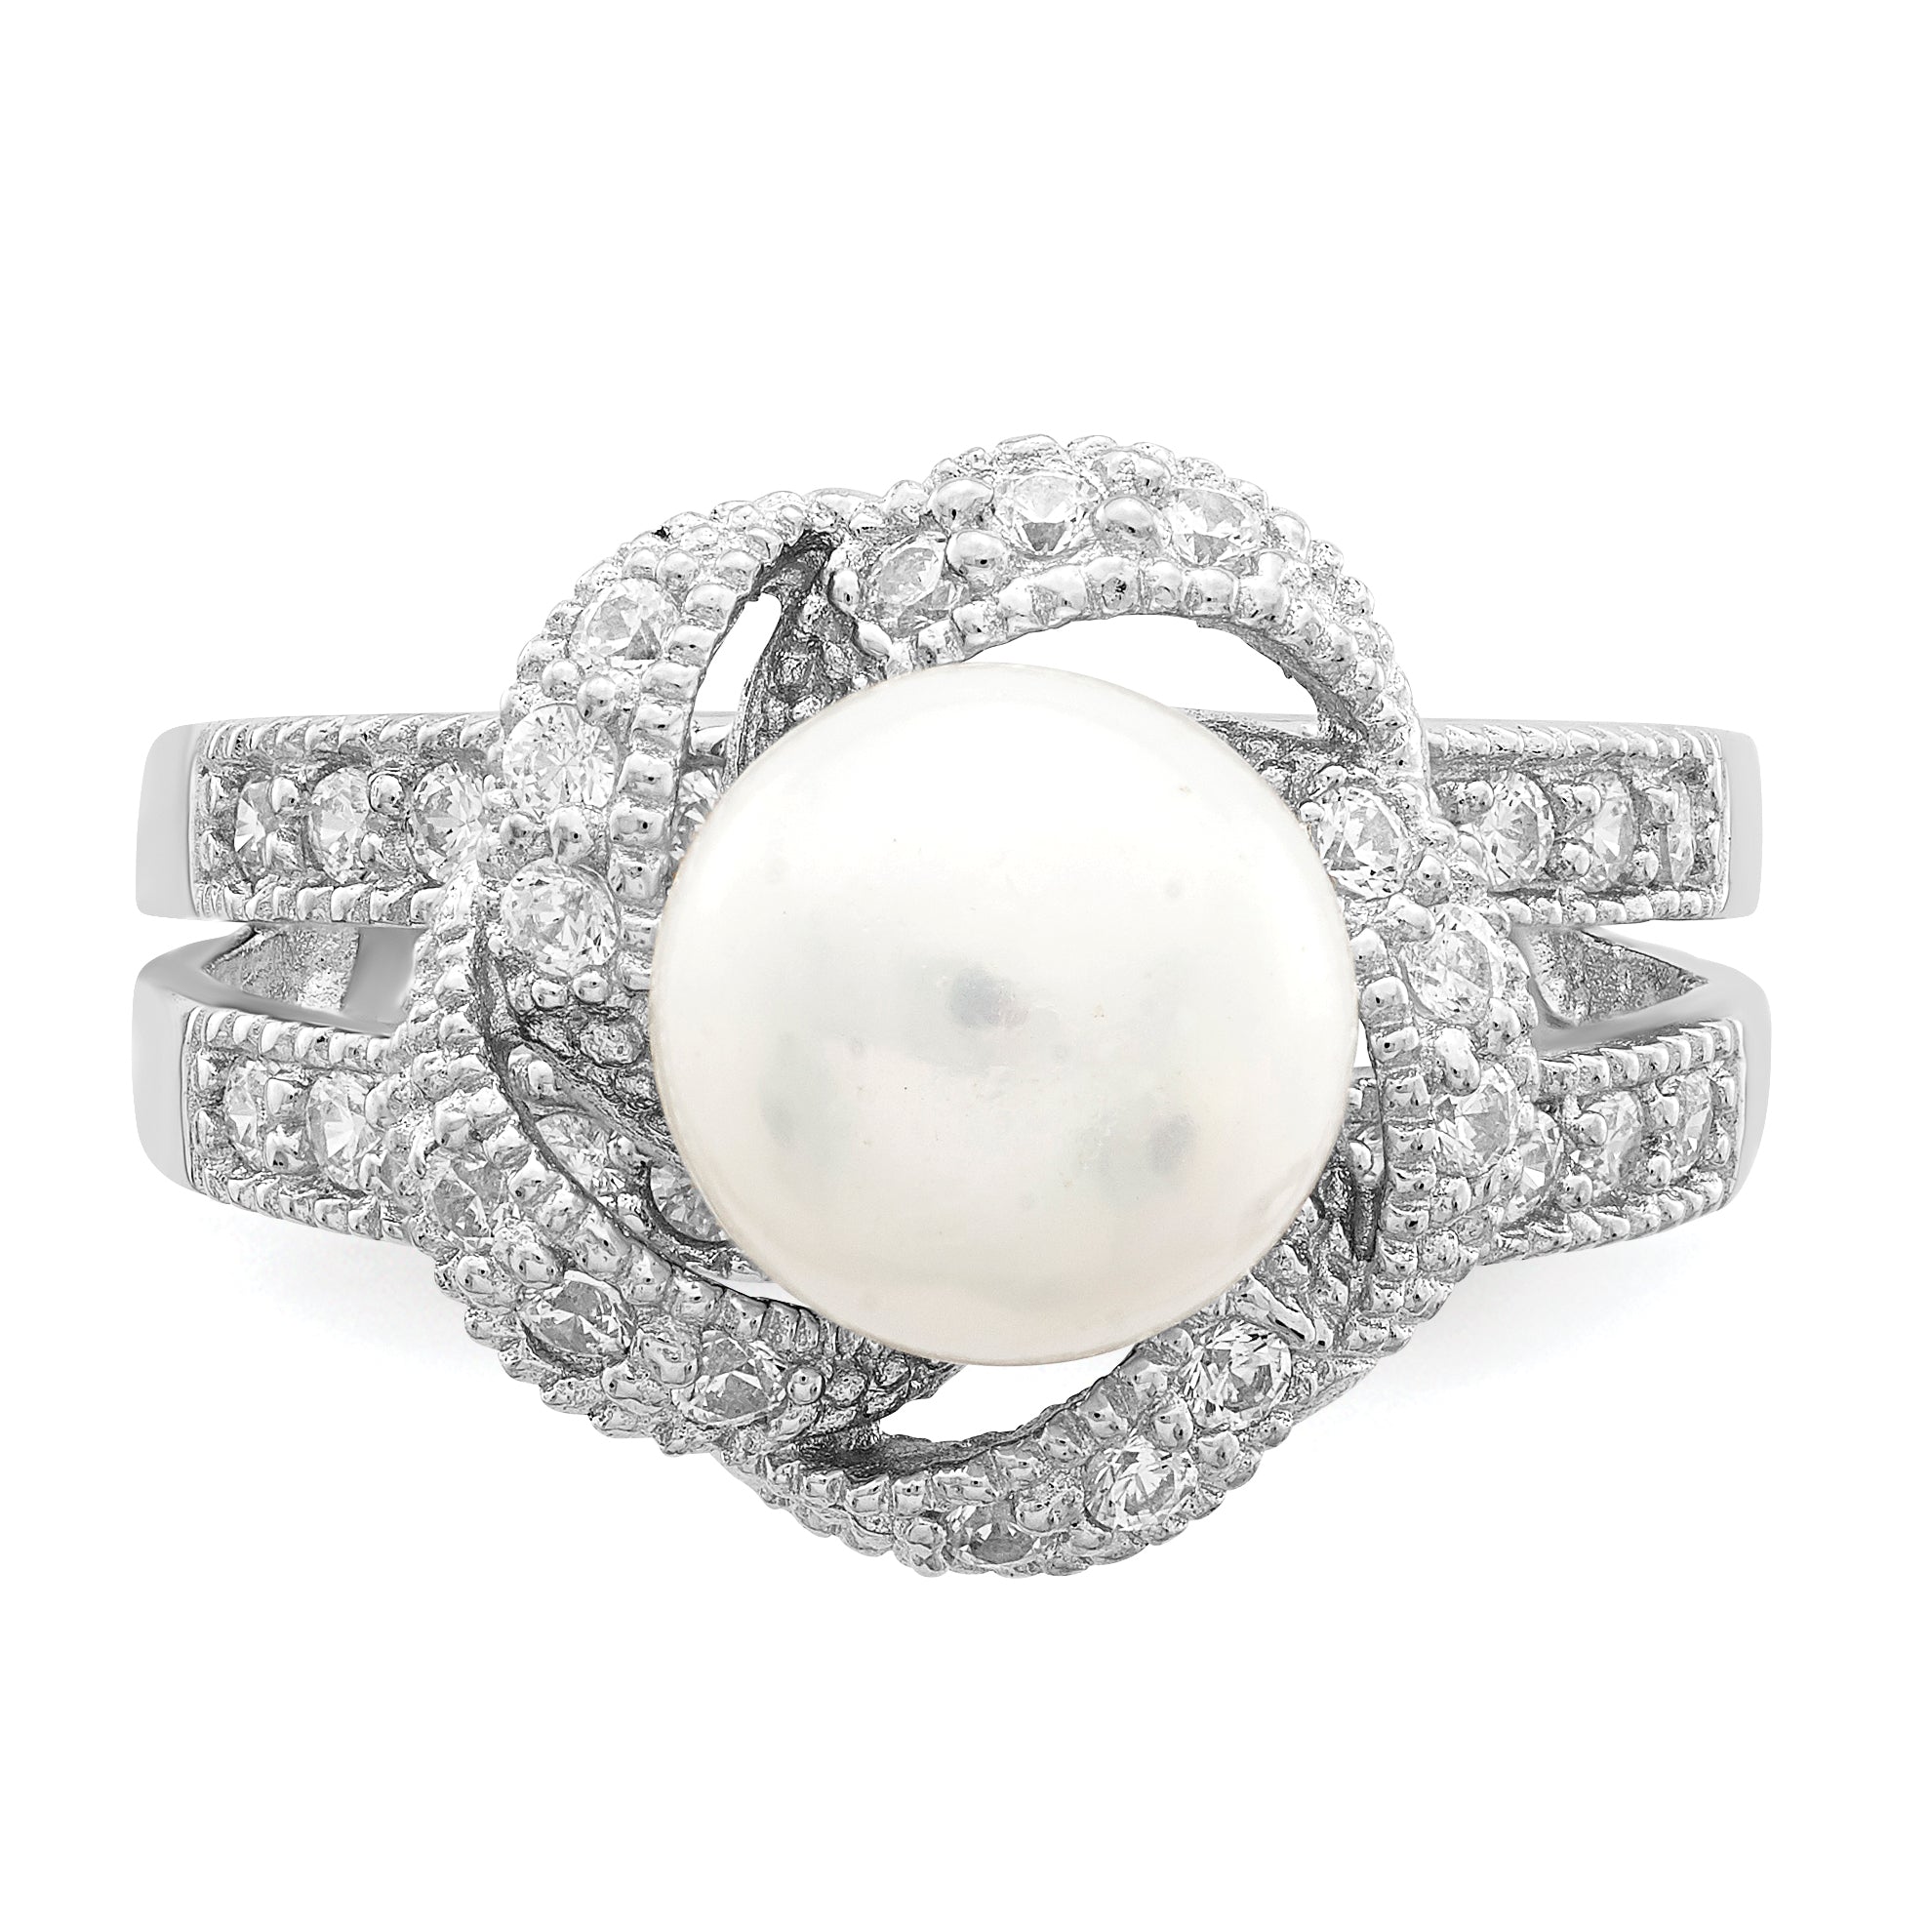 Sterling Silver Rhodium-plated Simulated Pearl and CZ Ring